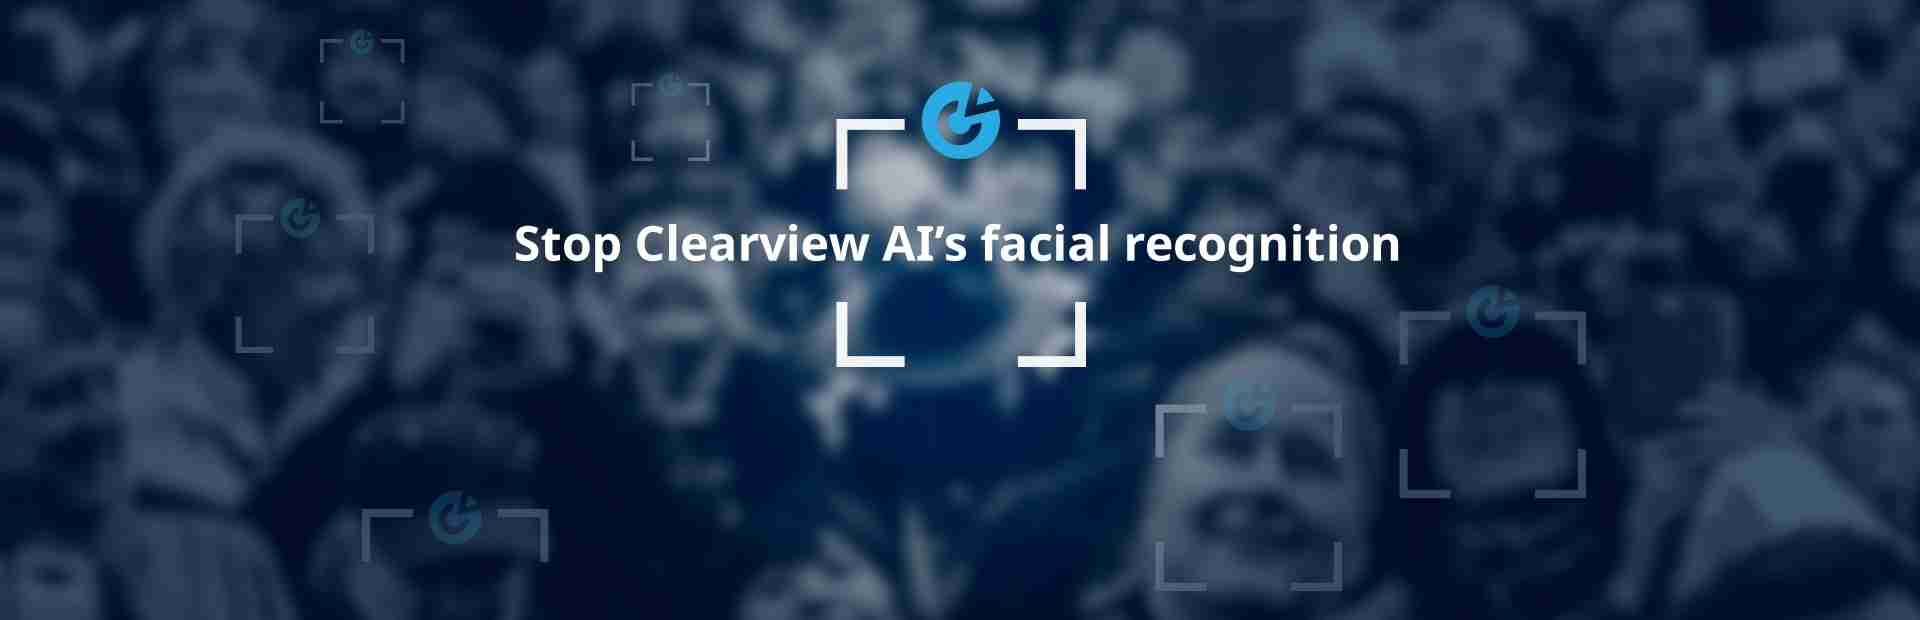 Take back your data from Clearview AI!